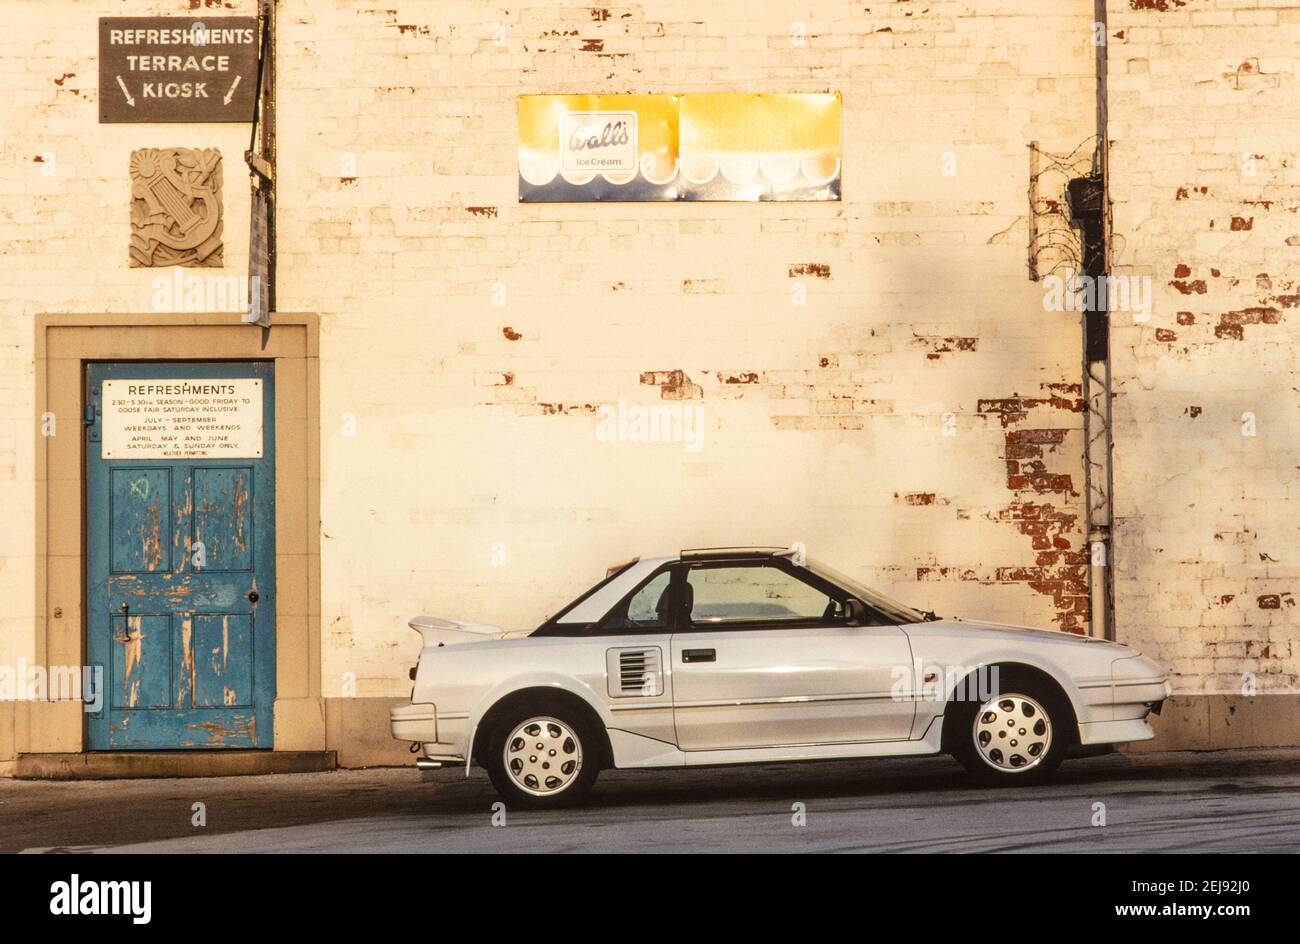 1993 A White Toyota MR2 Toyota photographed against an painted wall with peeling paint to contrast new and old. This Japanese sportscar was a  'Midship Runabout 2-seater’ 'mid-engine, rear-wheel-drive, 2-seater' or MR2. It had sharp, straight lines and pop up lights England GB UK Europe Stock Photo